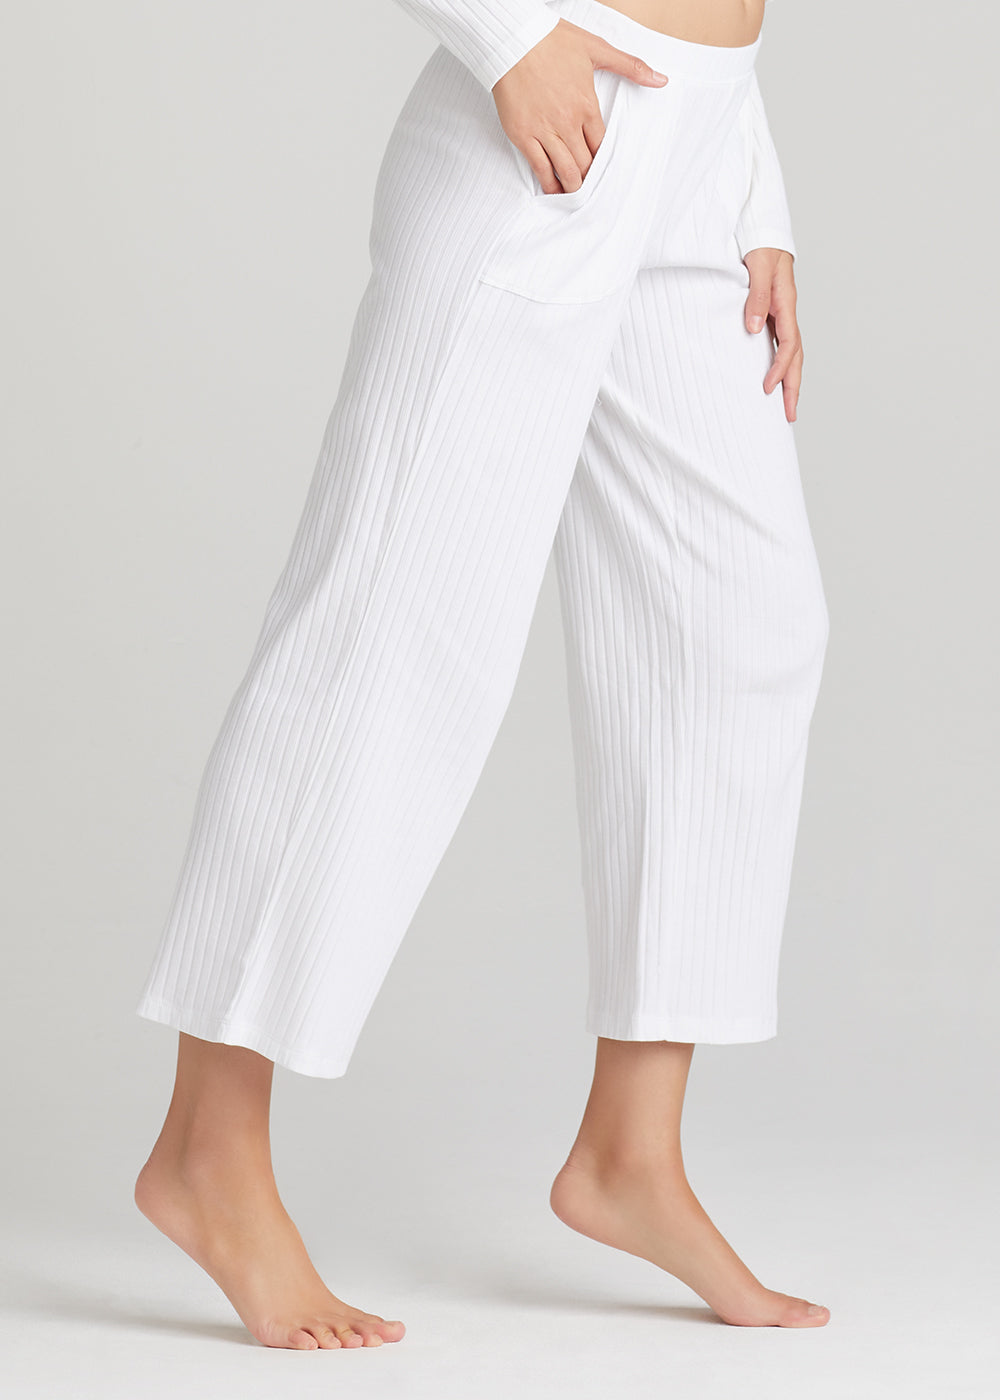 Cropped Lounge Pant - Cotton Rib from Yummie in White  - 1